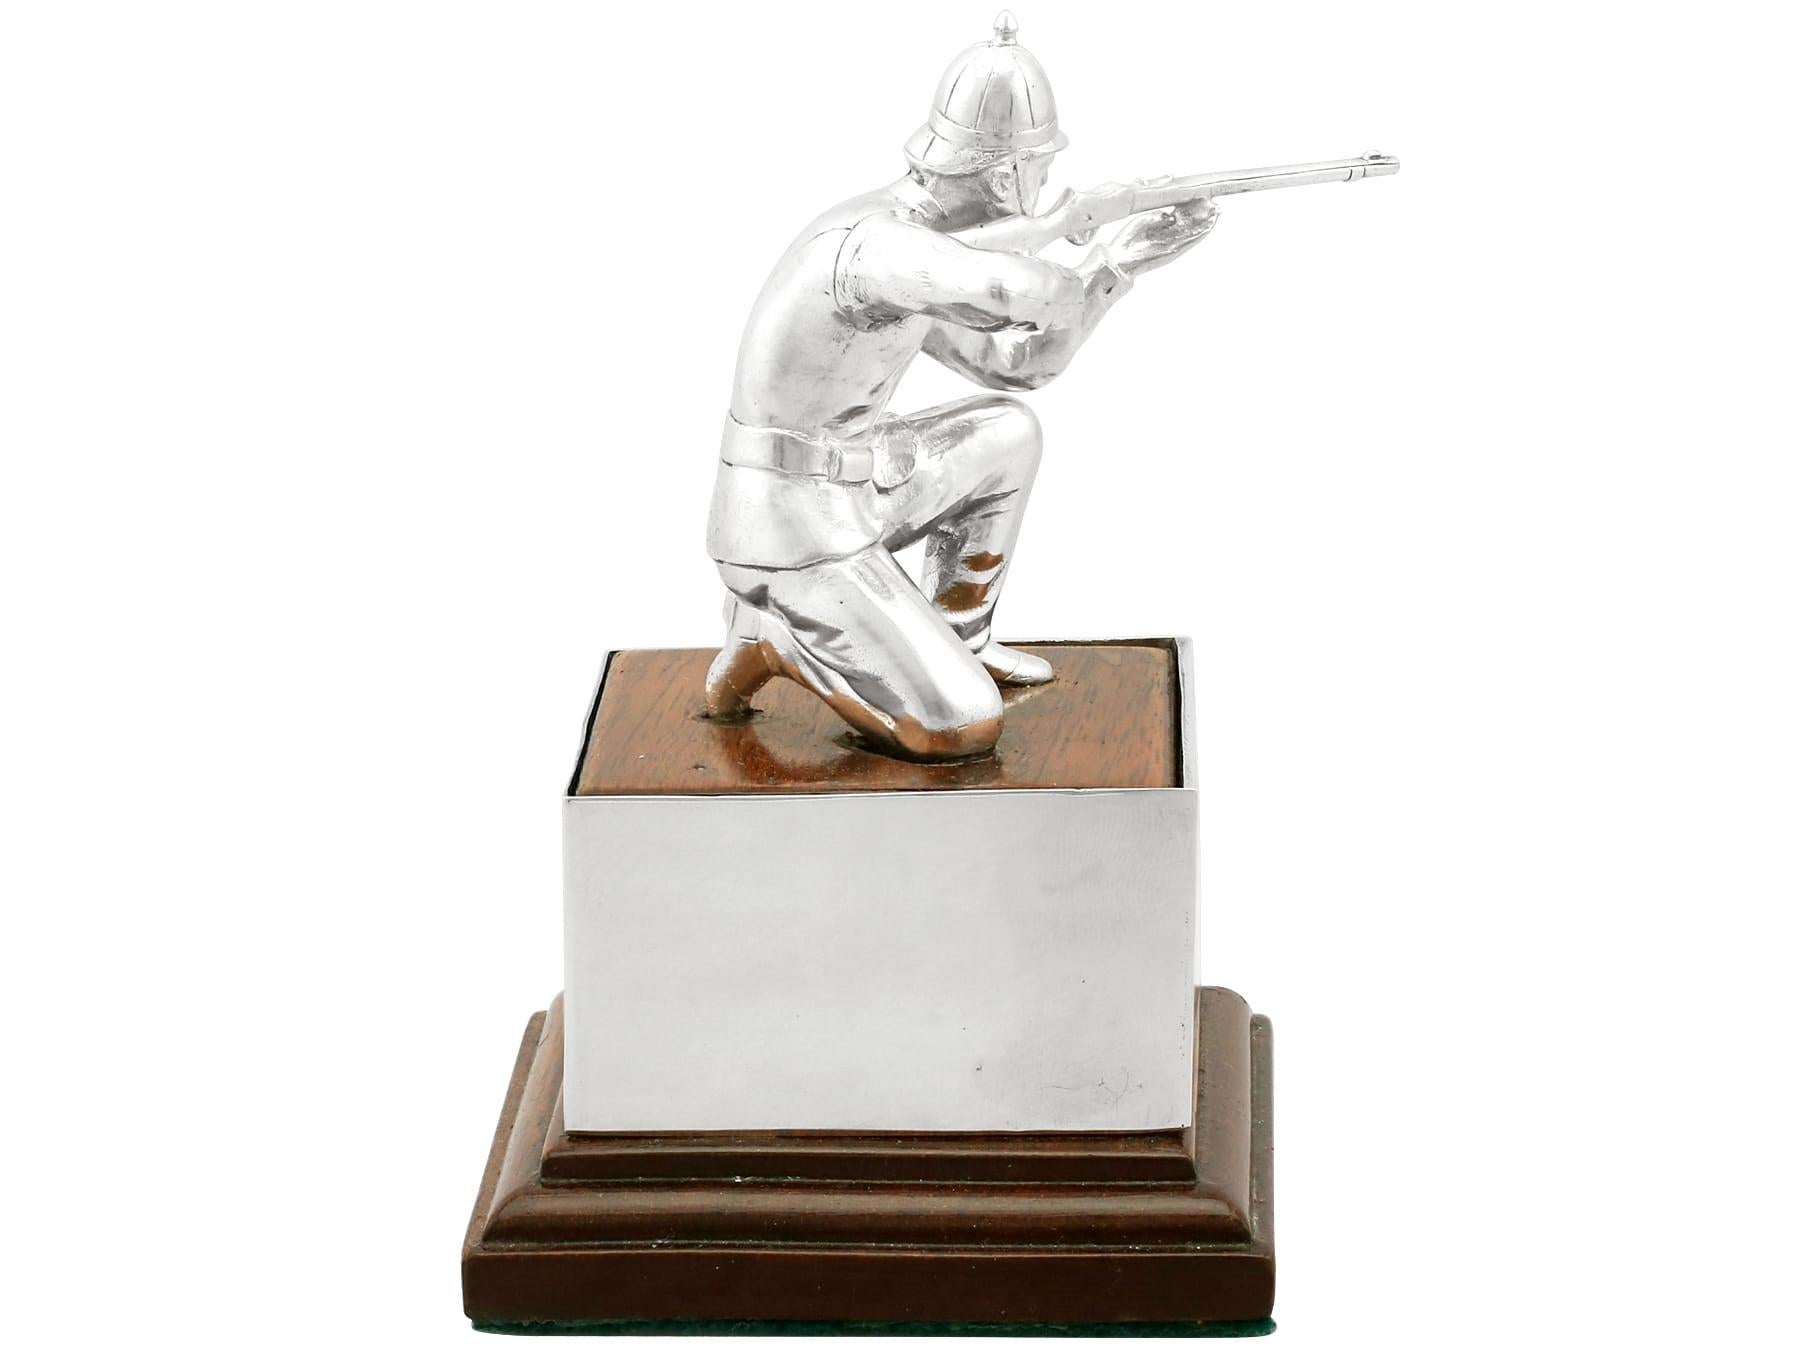 A fine vintage Elizabeth II English cast sterling silver presentation trophy on oakwood plinth in the form of a Victorian soldier; an addition to our military related silverware collection.

This fine vintage Elizabeth II English cast sterling